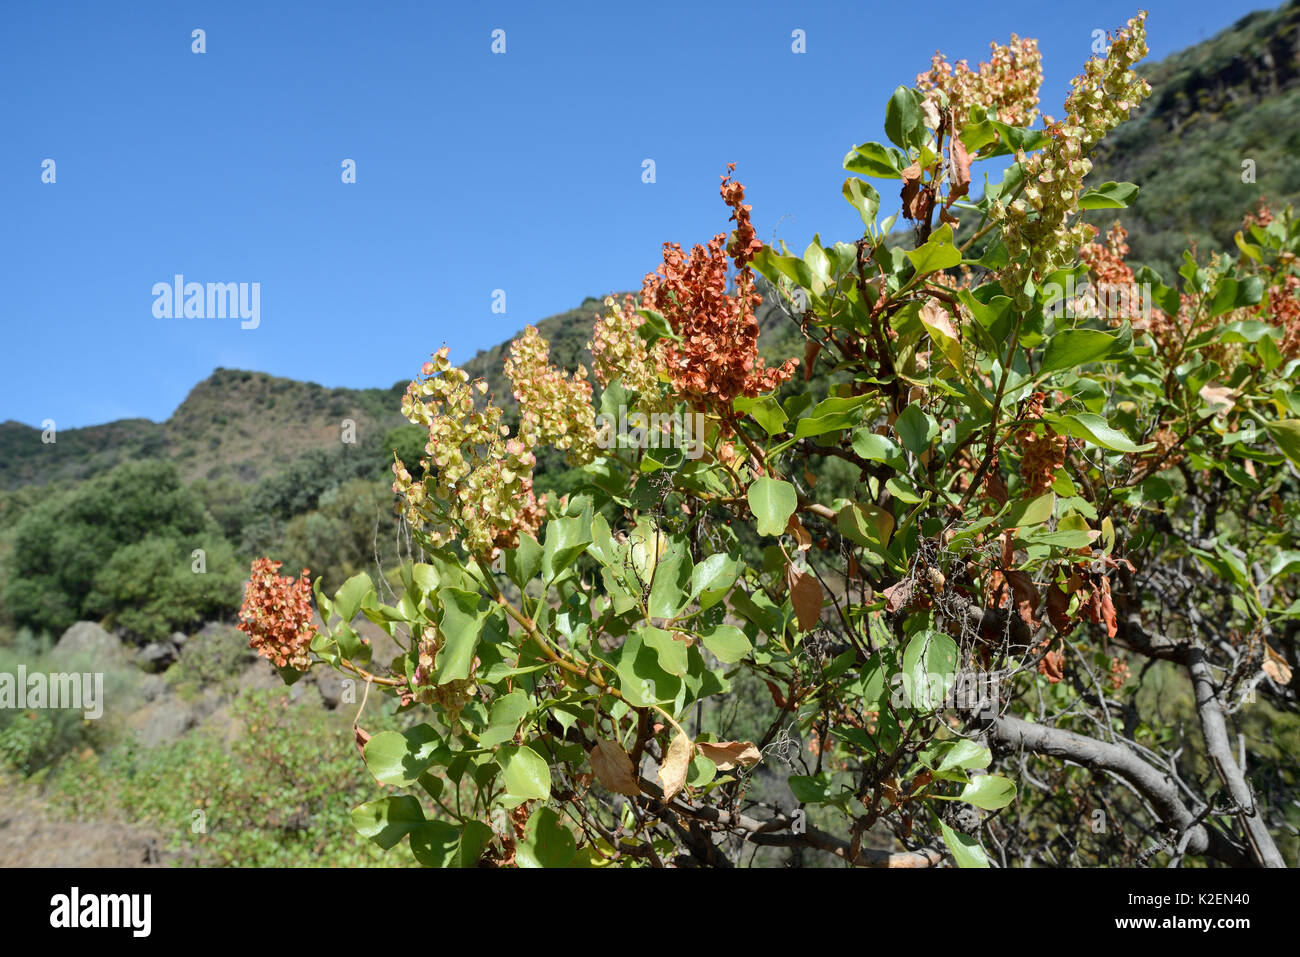 Vinegrera / Canary island sorrel (Rumex lunaria), endemic to the Canaries, flowering in mountain valley. Gran Canaria UNESCO Biosphere Reserve, Gran Canaria, Canary Islands. June. Stock Photo